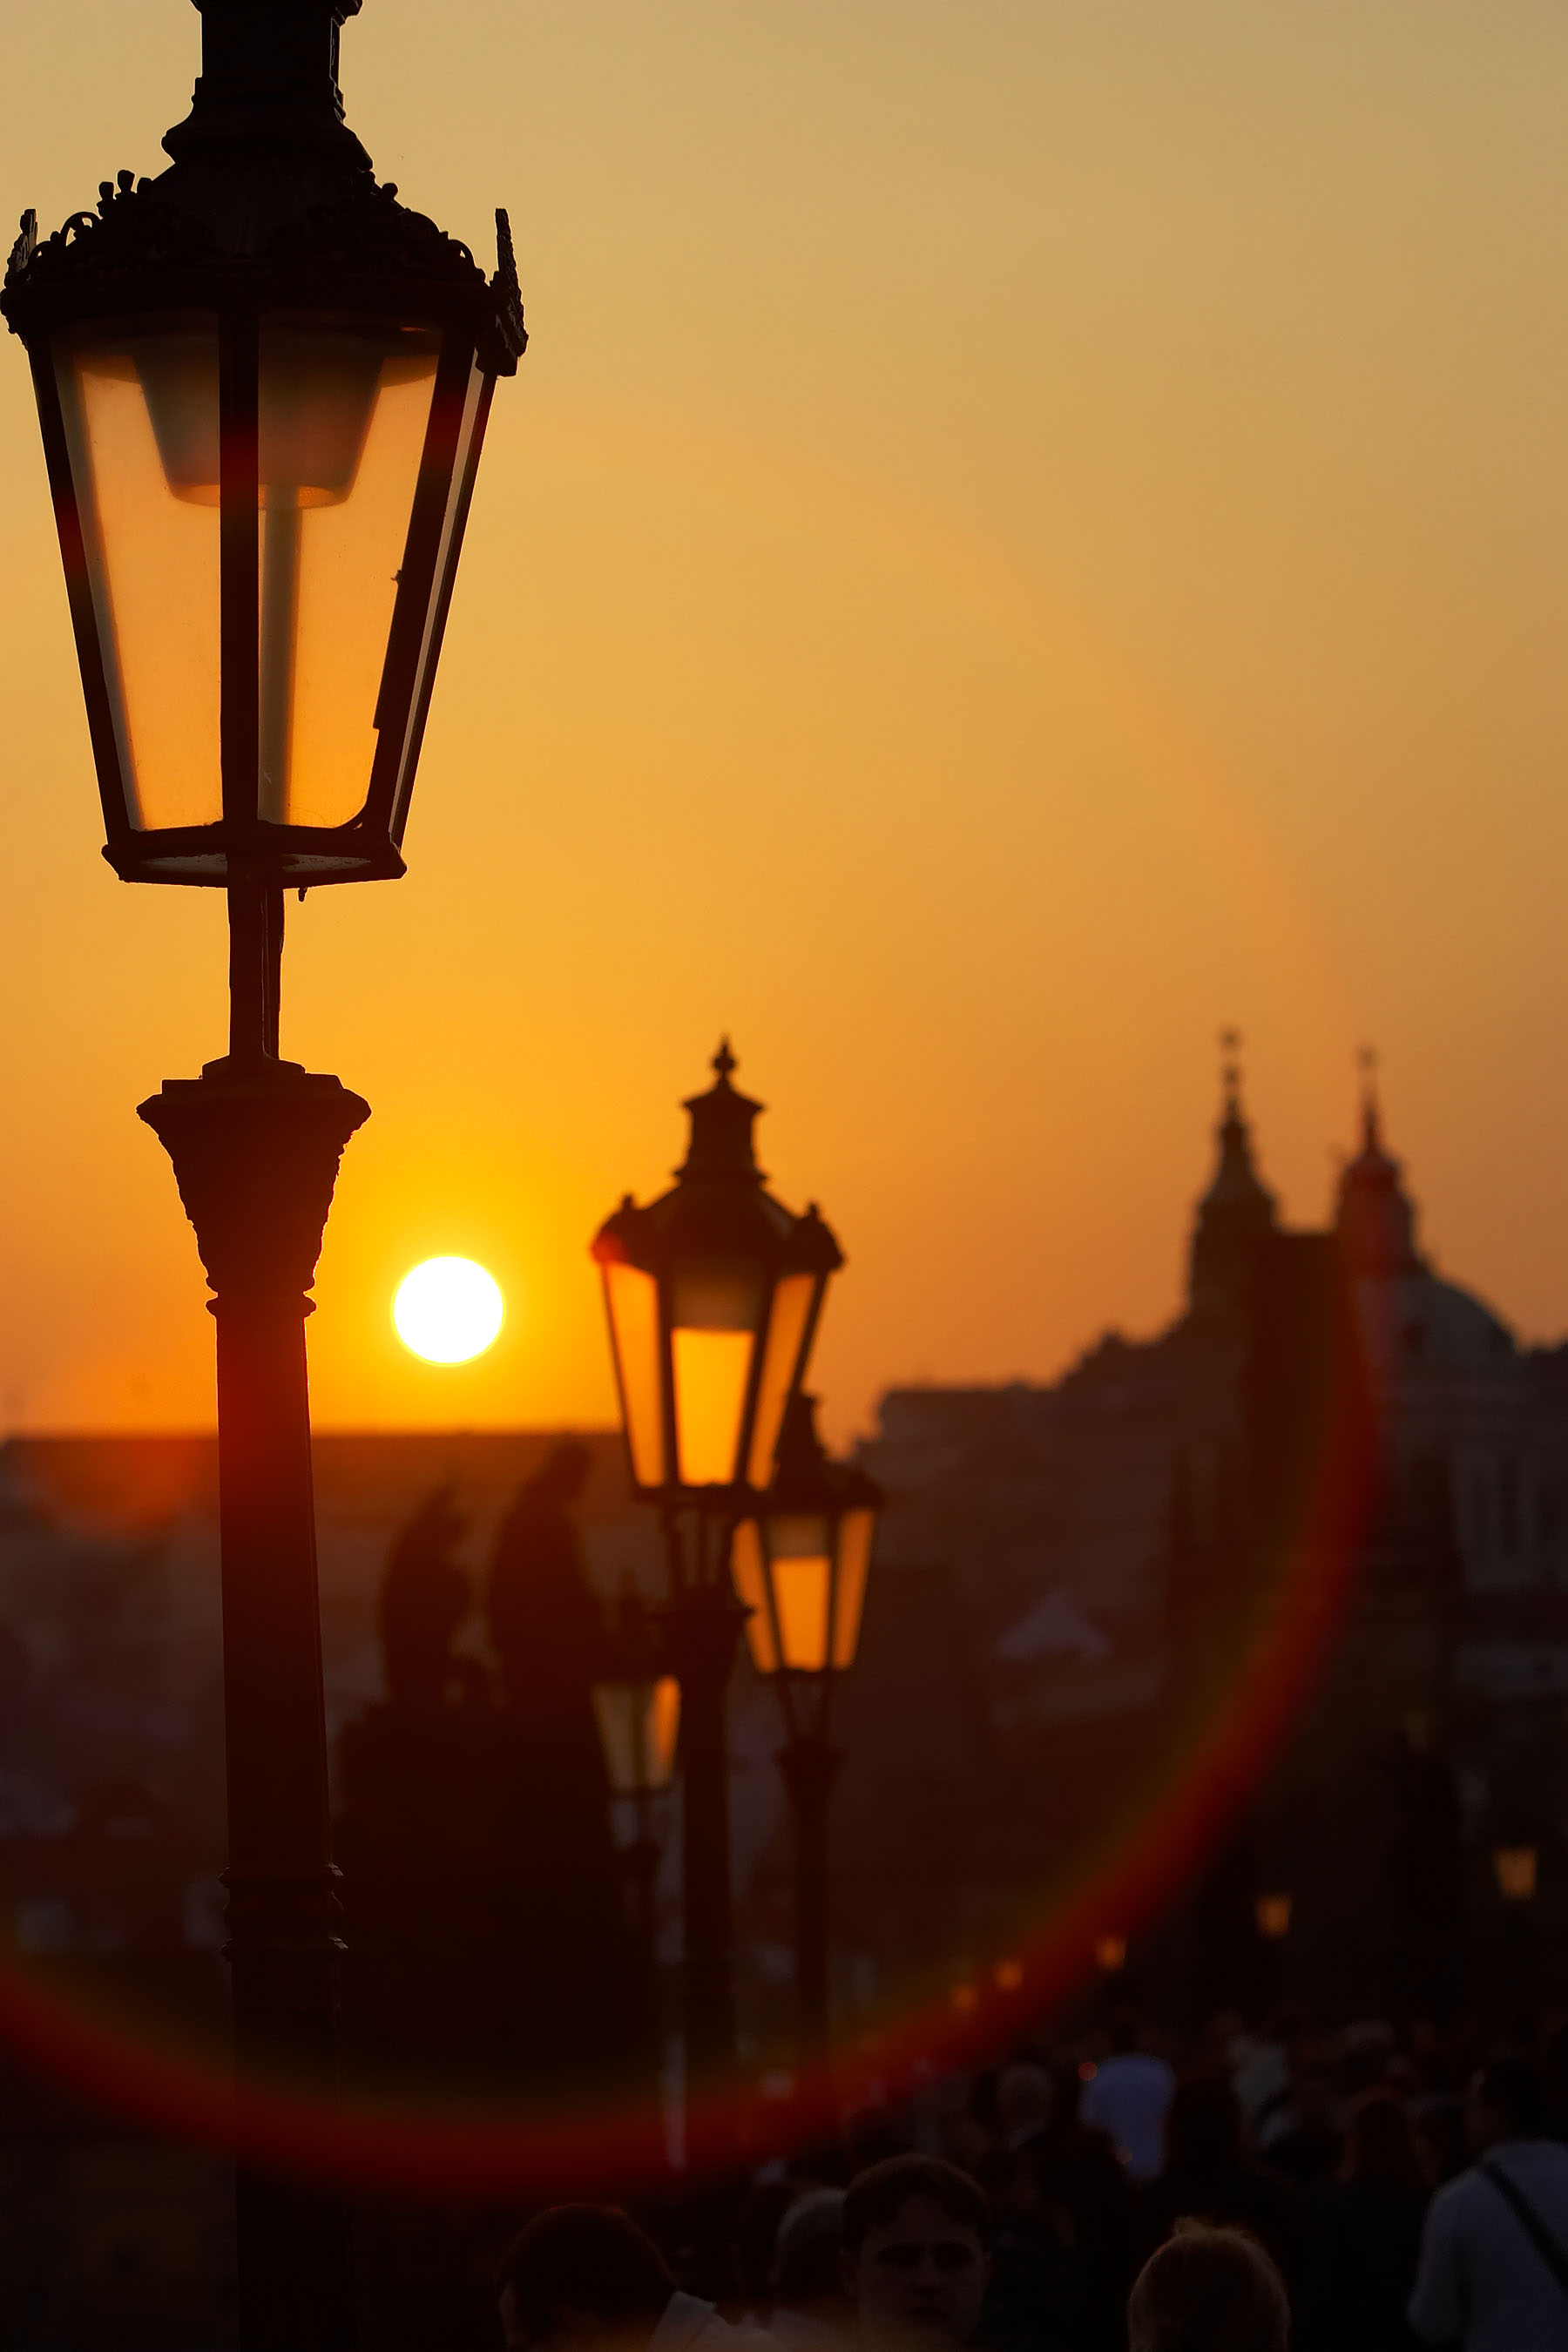 Lamp at dusk on the Charles Bridge over the Vlatva River in Prague, Czech Republic with Prague Castle in background